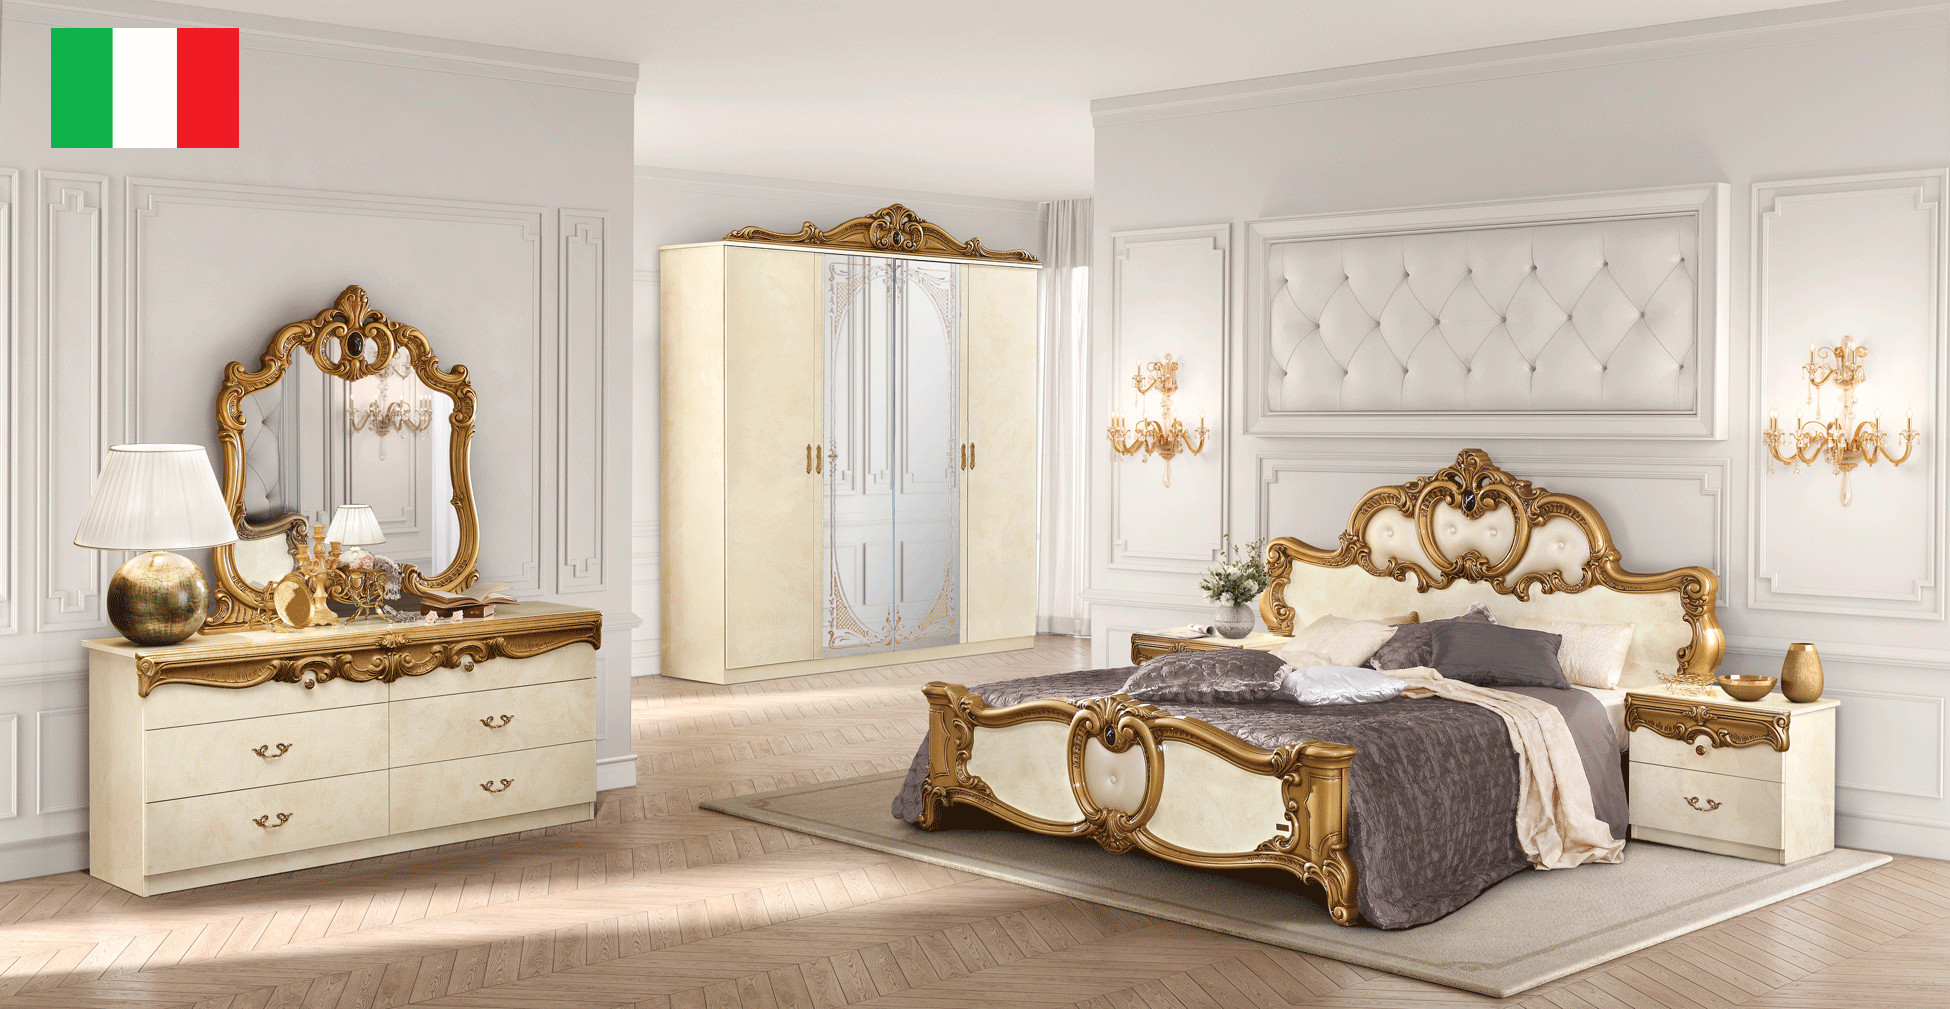 Bedroom Furniture Beds with storage Barocco Ivory w/Gold Bedroom